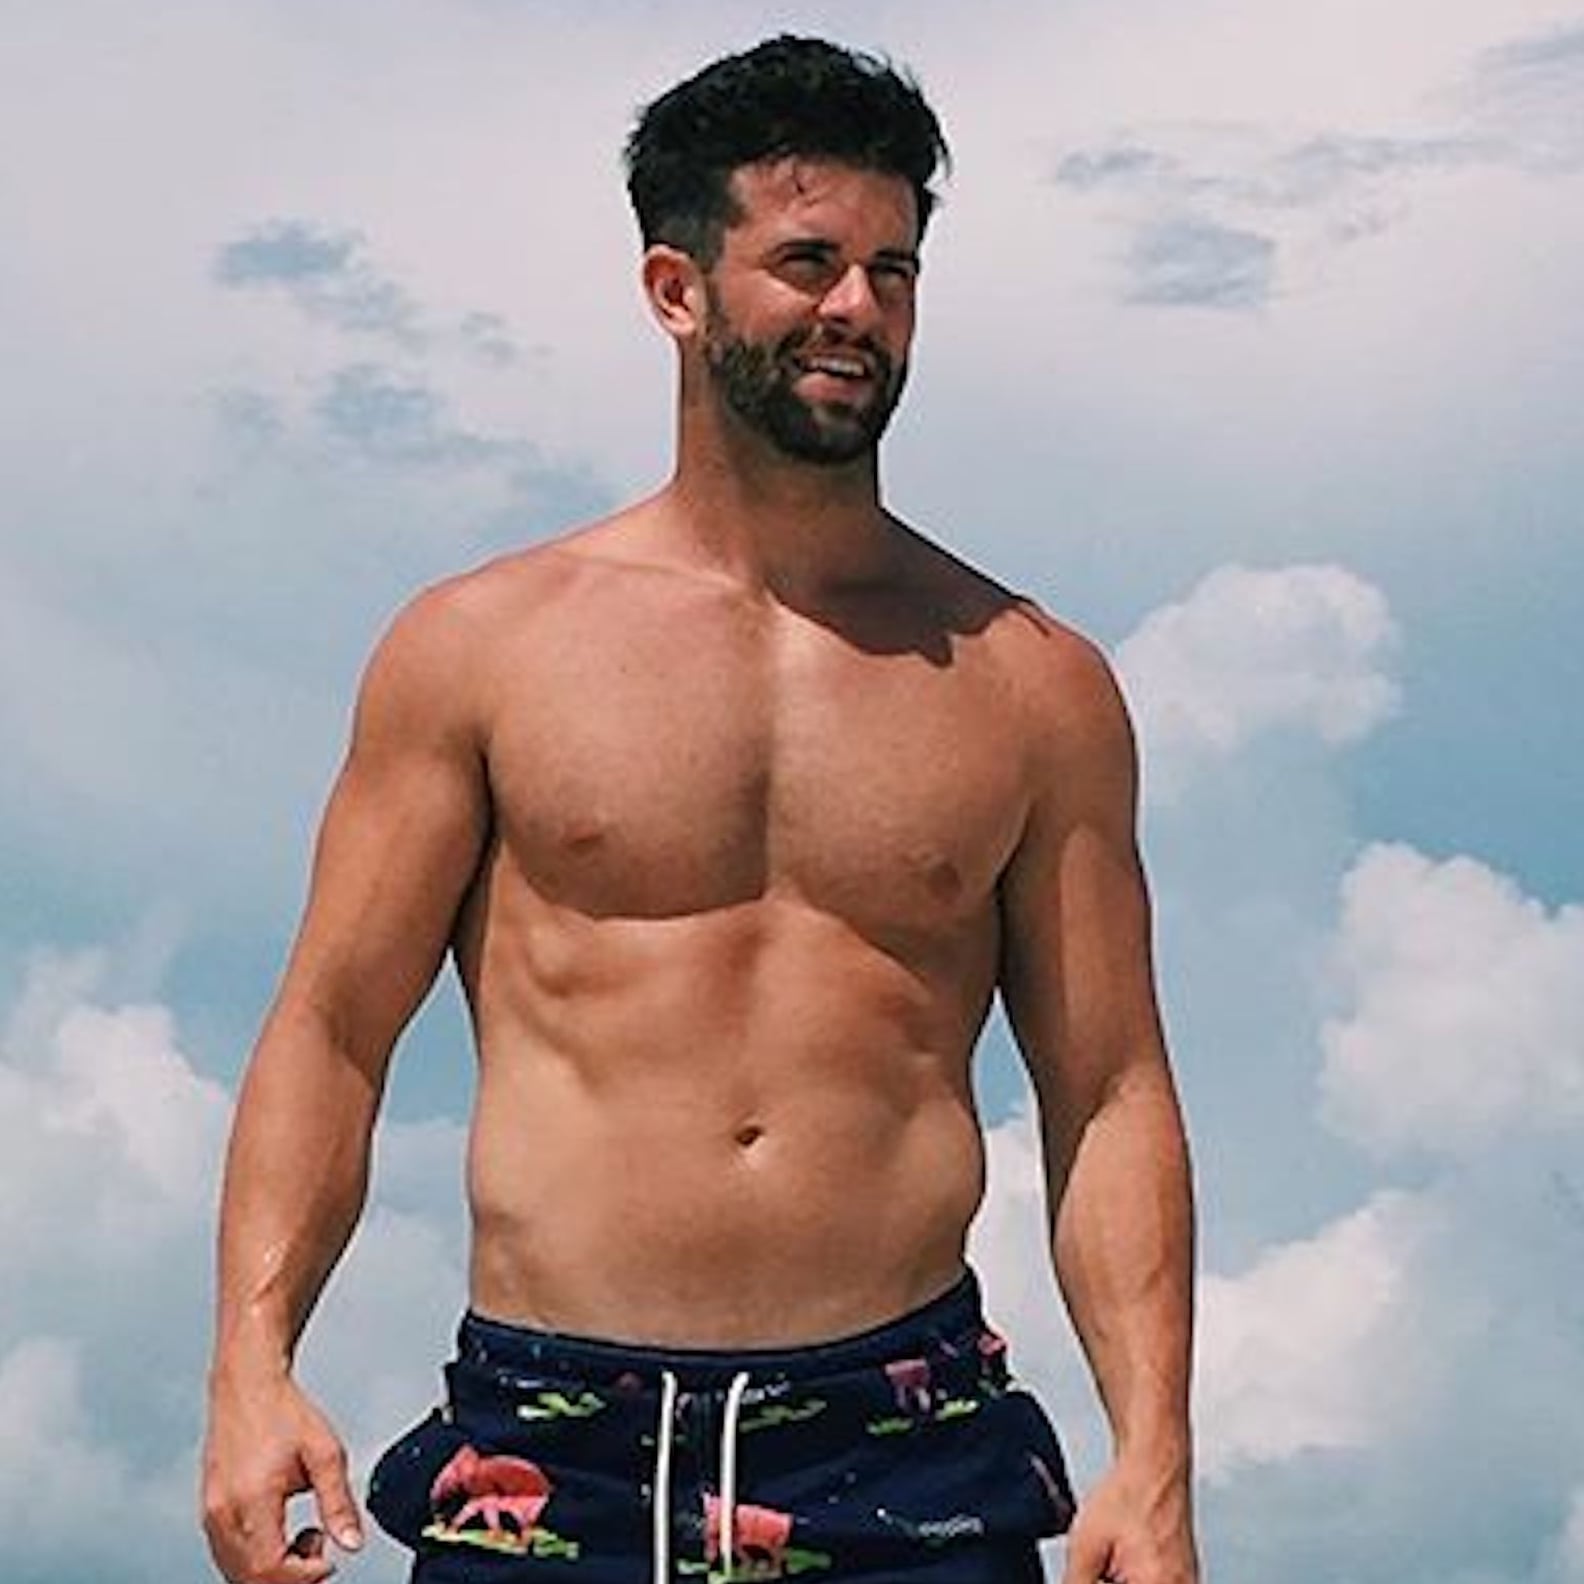 The Bachelorette's Jed Wyatt Shirtless Pictures | POPSUGAR Celebrity